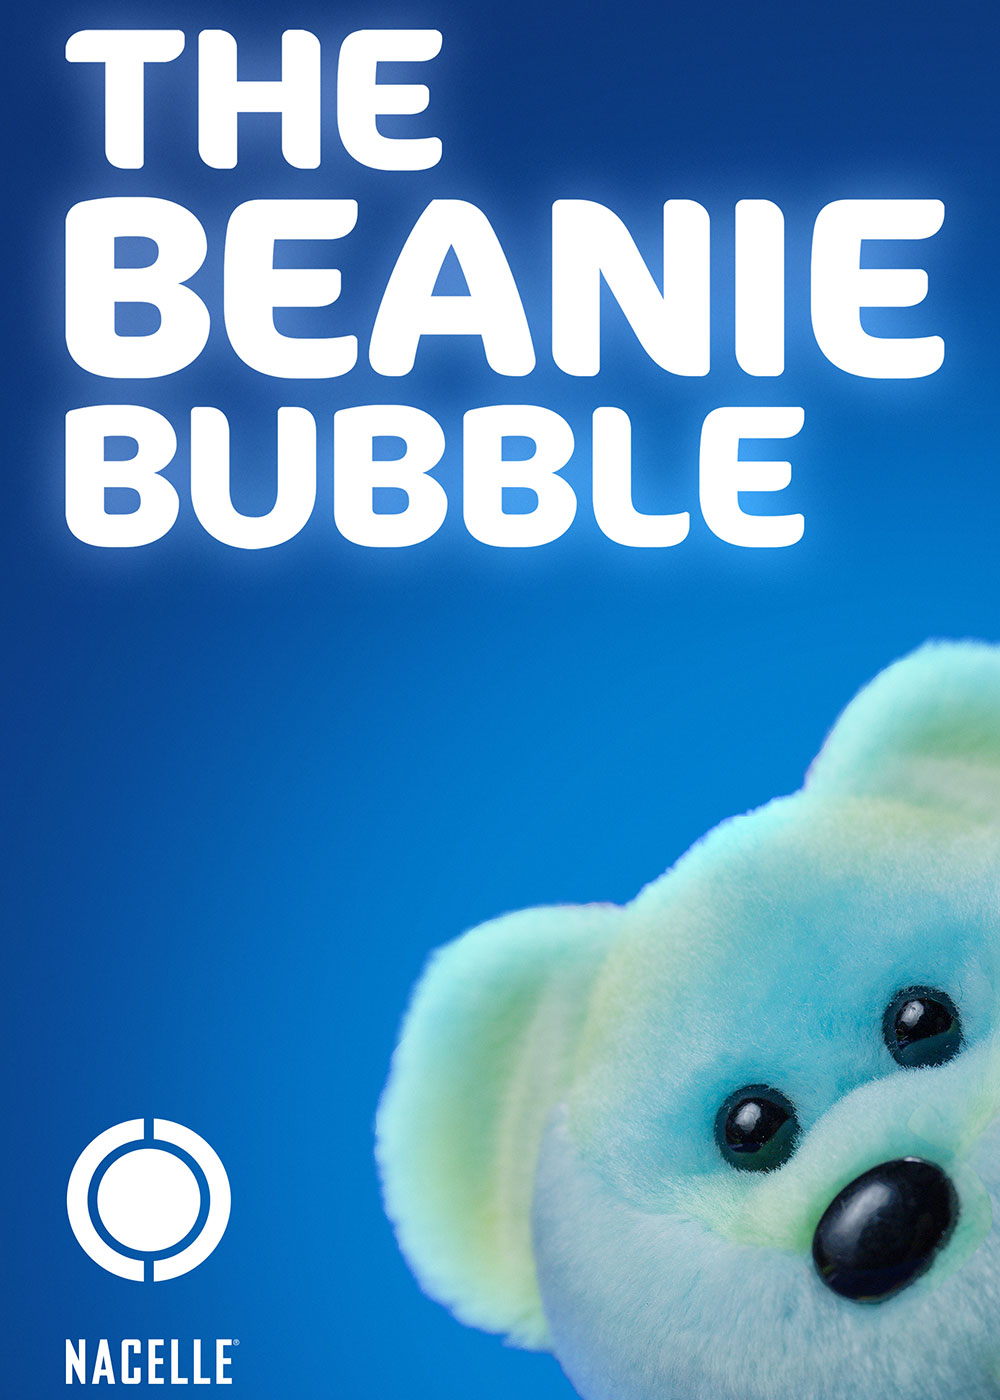 The Beanie Bubble Movie (2023) Release Date, Review, Cast, Trailer